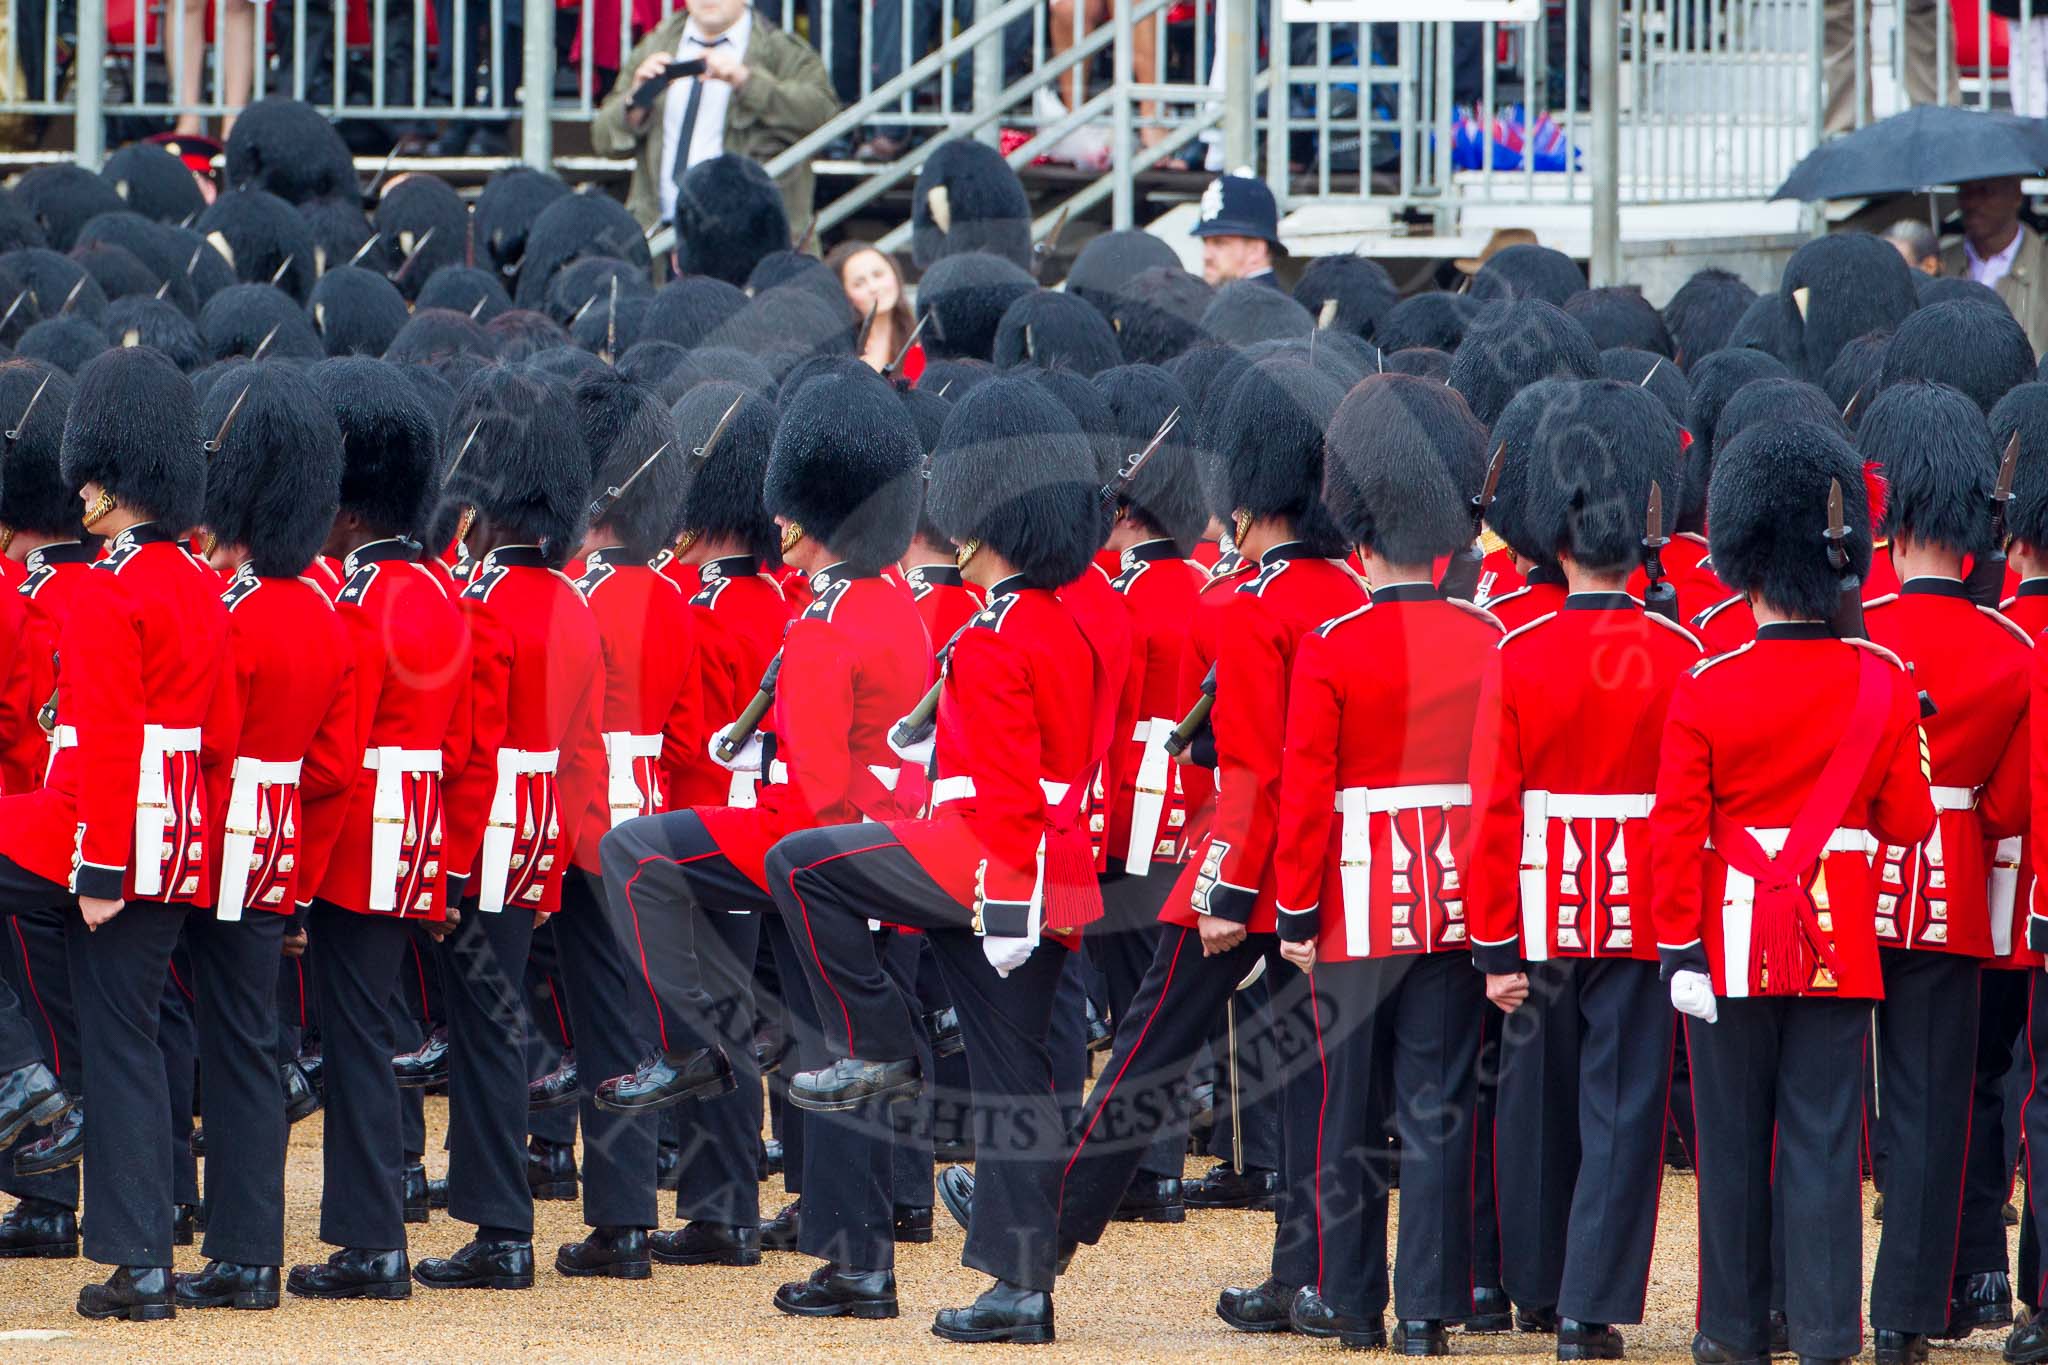 The Colonel's Review 2014.
Horse Guards Parade, Westminster,
London,

United Kingdom,
on 07 June 2014 at 11:39, image #536